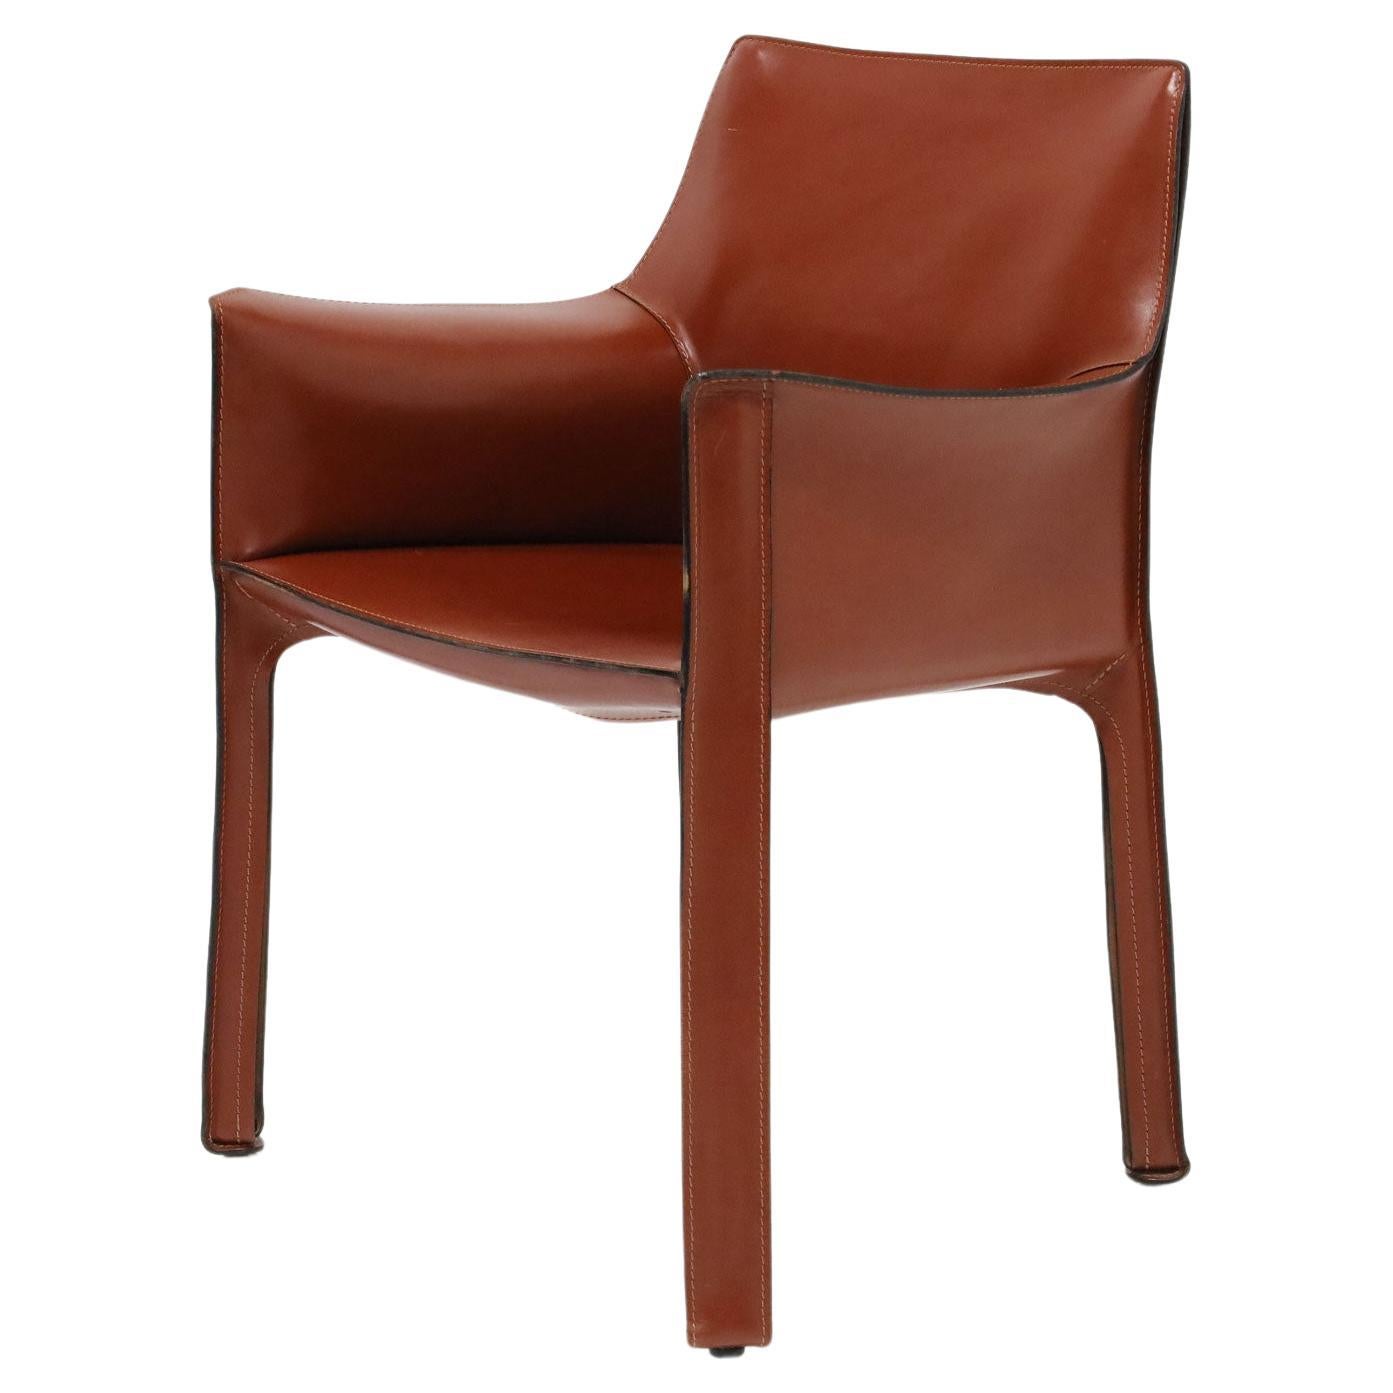 Mario Bellini 413 "CAB" Chair for Cassina in Hazelnut  Leather